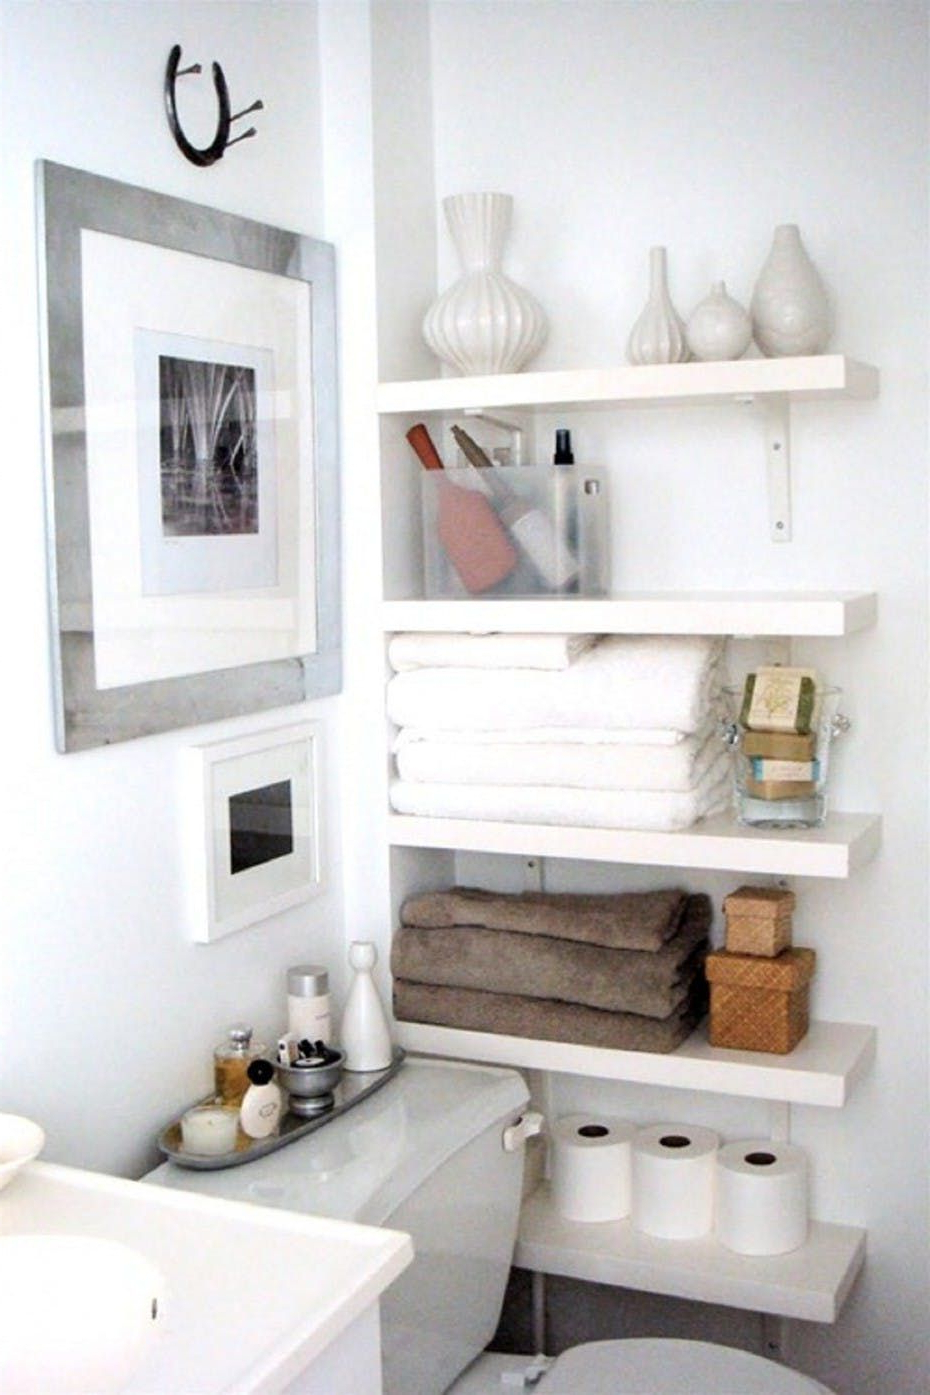 No More Small Bathroom Woes 6 Places To Add Shelving For